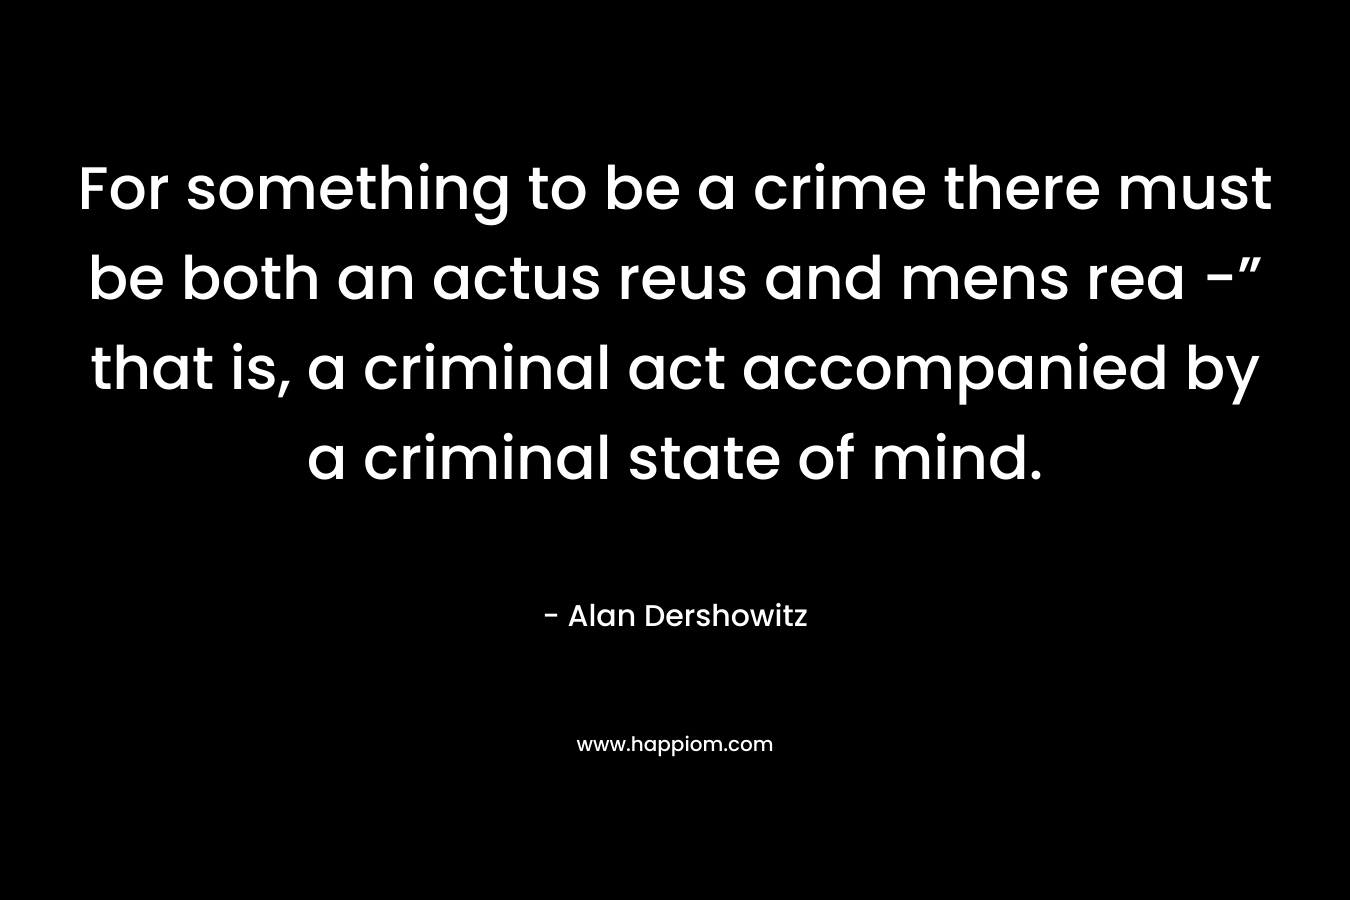 For something to be a crime there must be both an actus reus and mens rea -” that is, a criminal act accompanied by a criminal state of mind. – Alan Dershowitz